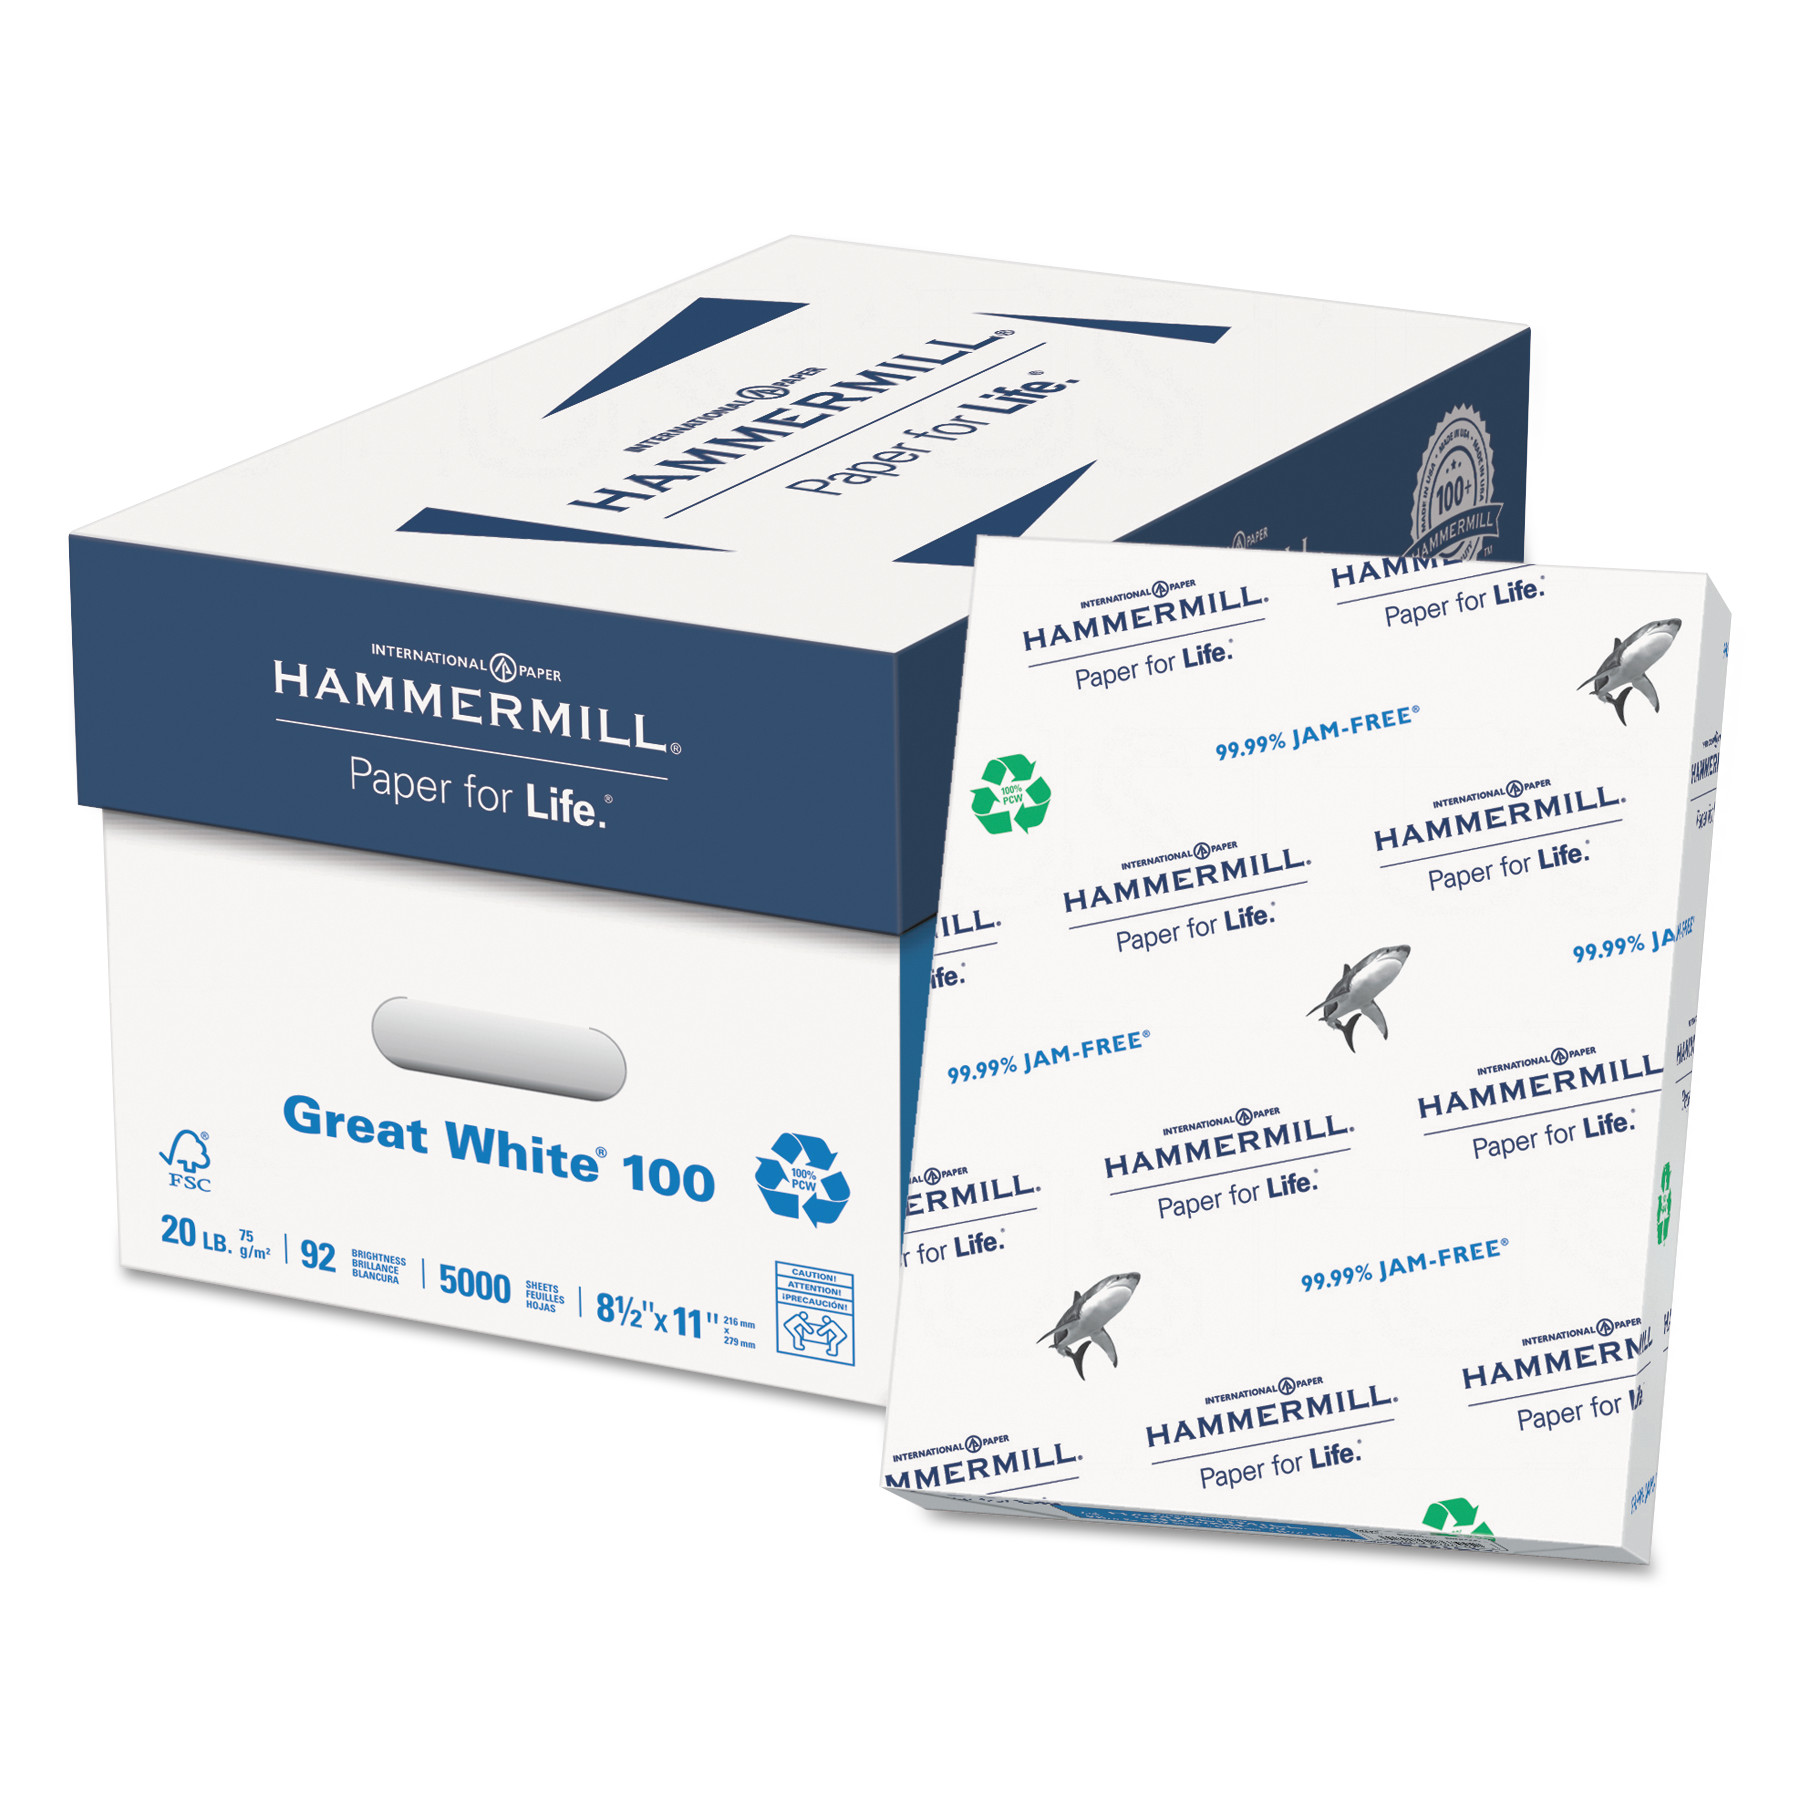  Hammermill 86790 Great White 100 Recycled Print Paper, 92 Bright, 20lb, 8.5 x 11, White, 500 Sheets/Ream, 10 Reams/Carton (HAM86790) 